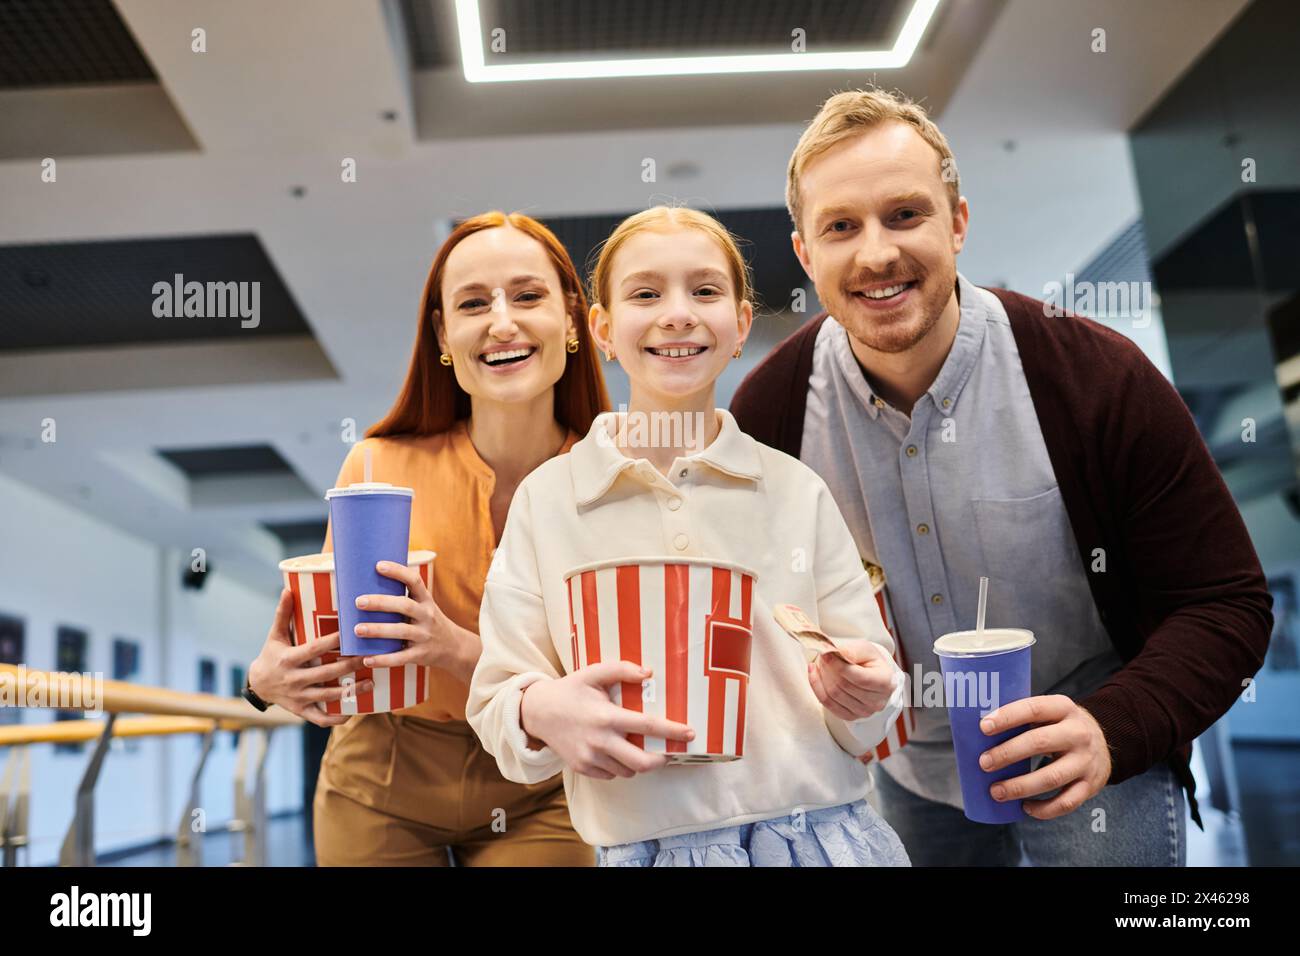 family smiling, holding cups of popcorn, bonding and enjoying a fun movie time together at the cinema. Stock Photo